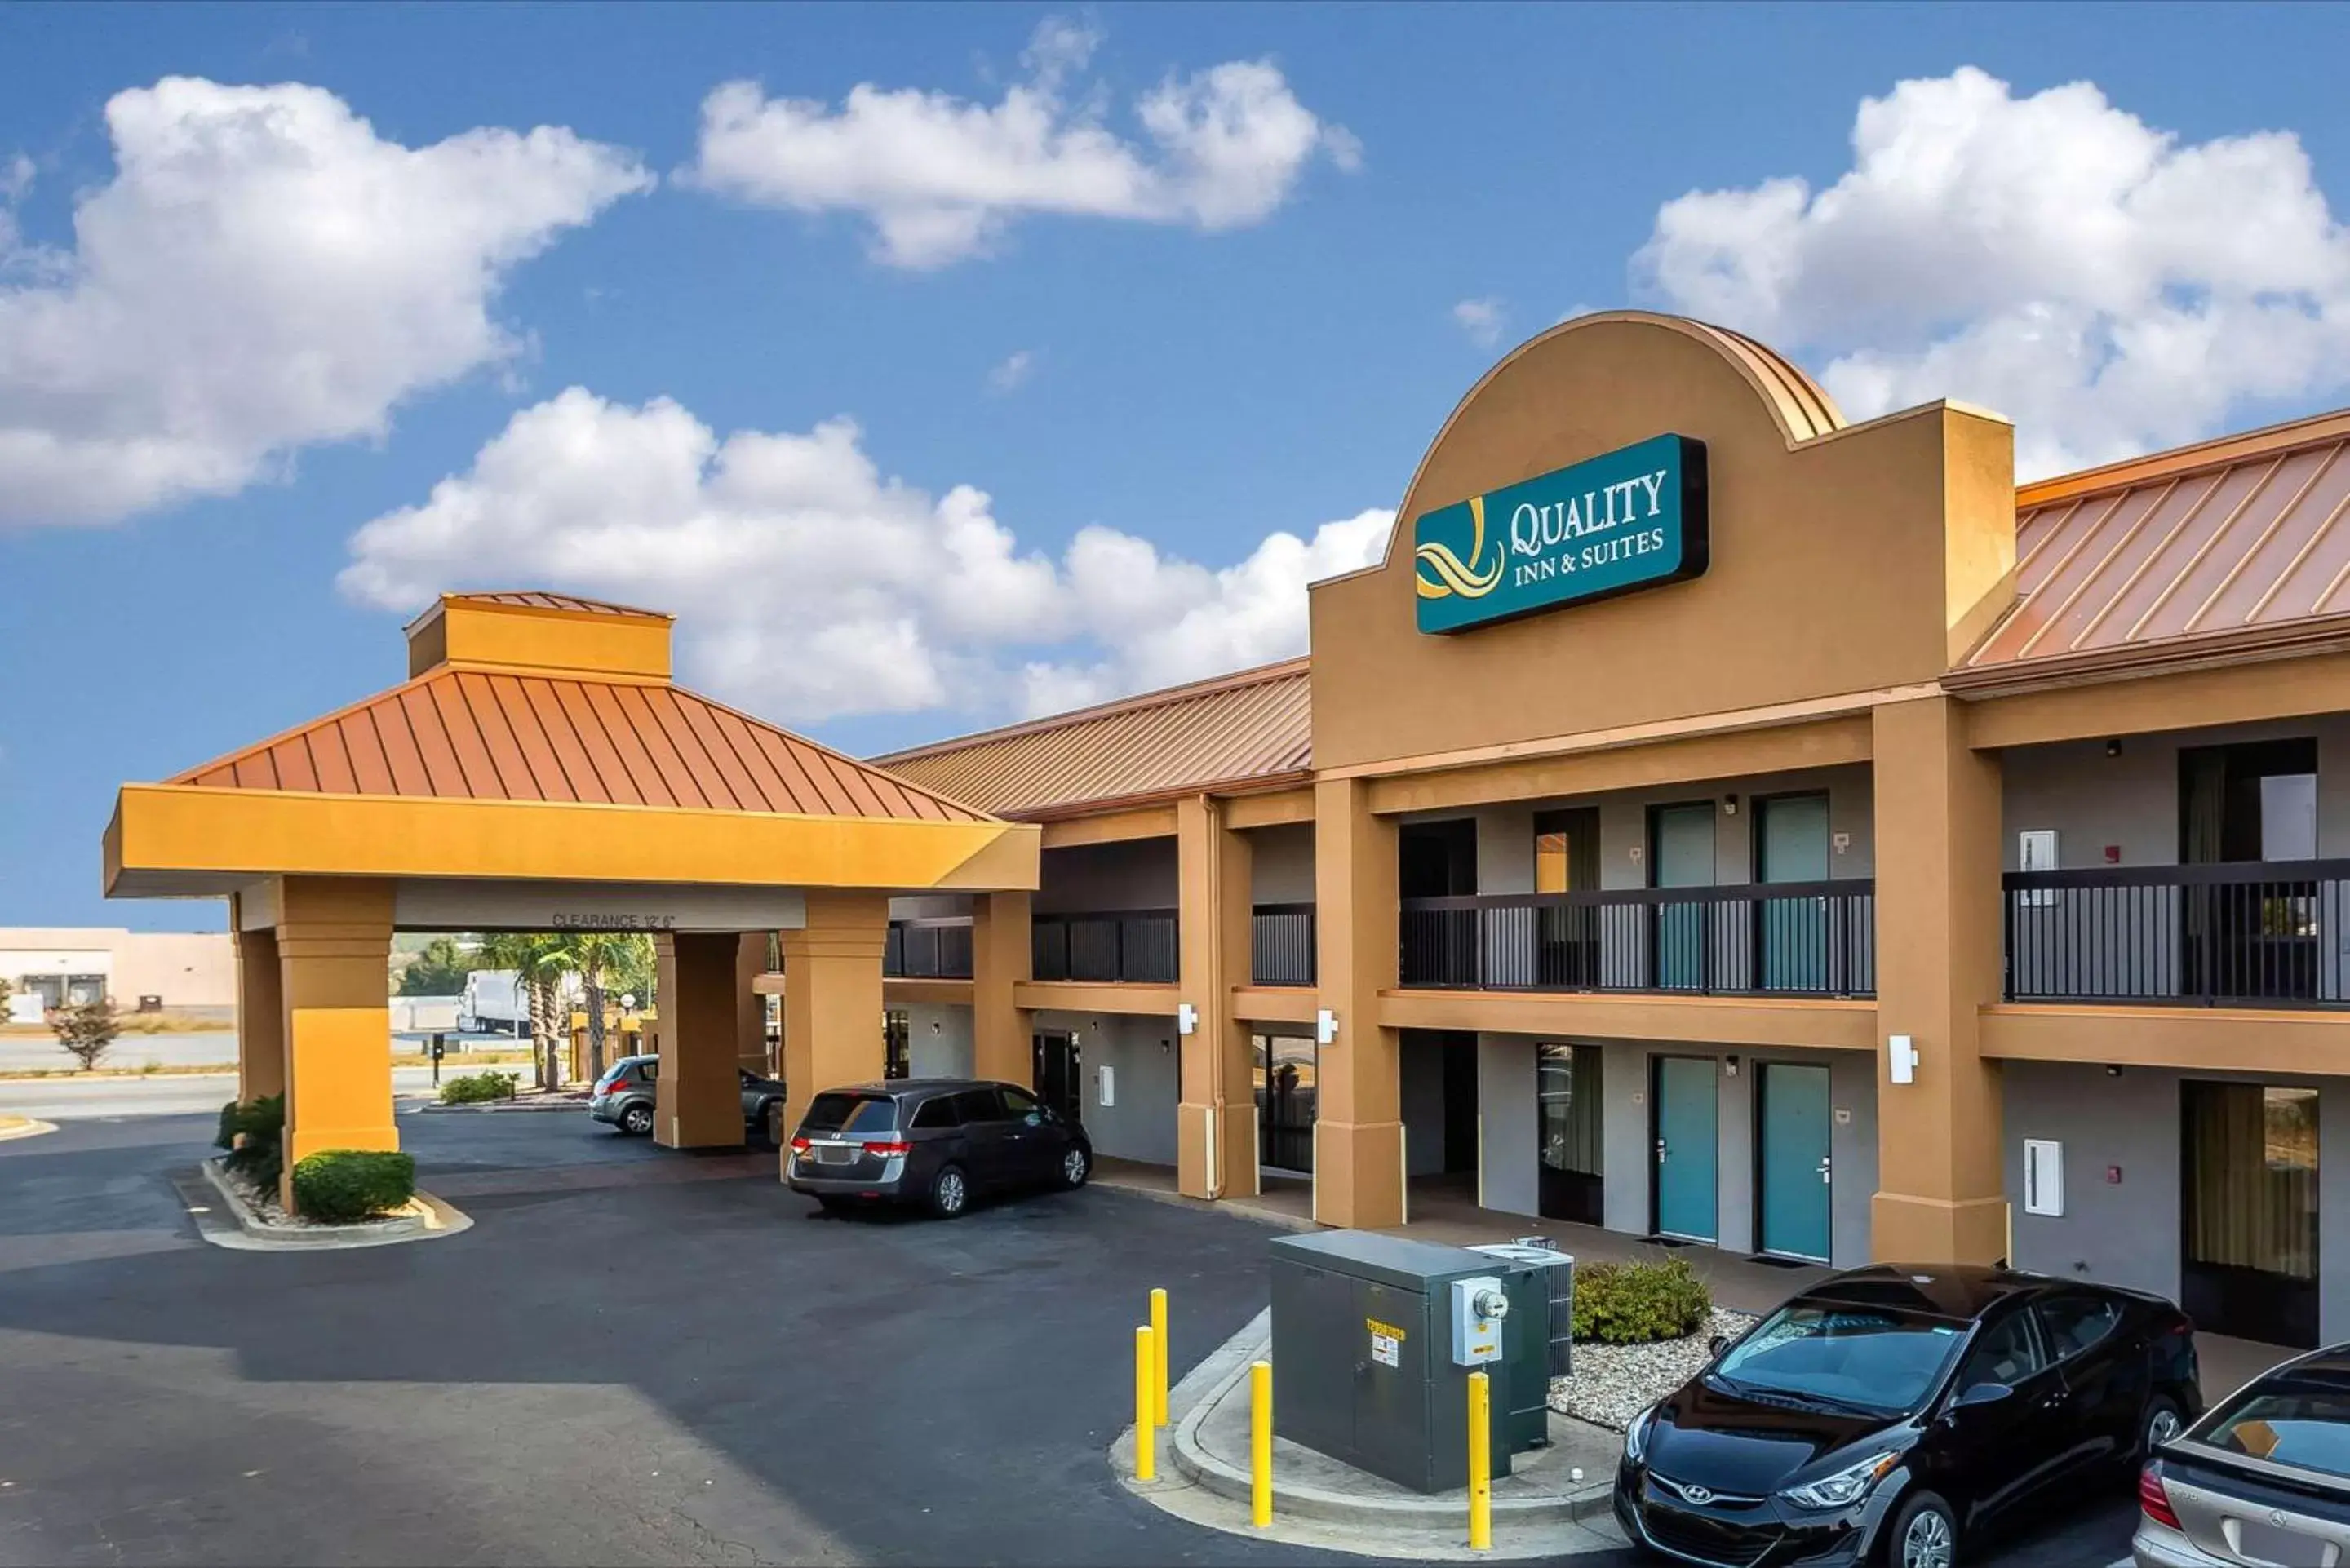 Property Building in Quality Inn & Suites near Robins Air Force Base